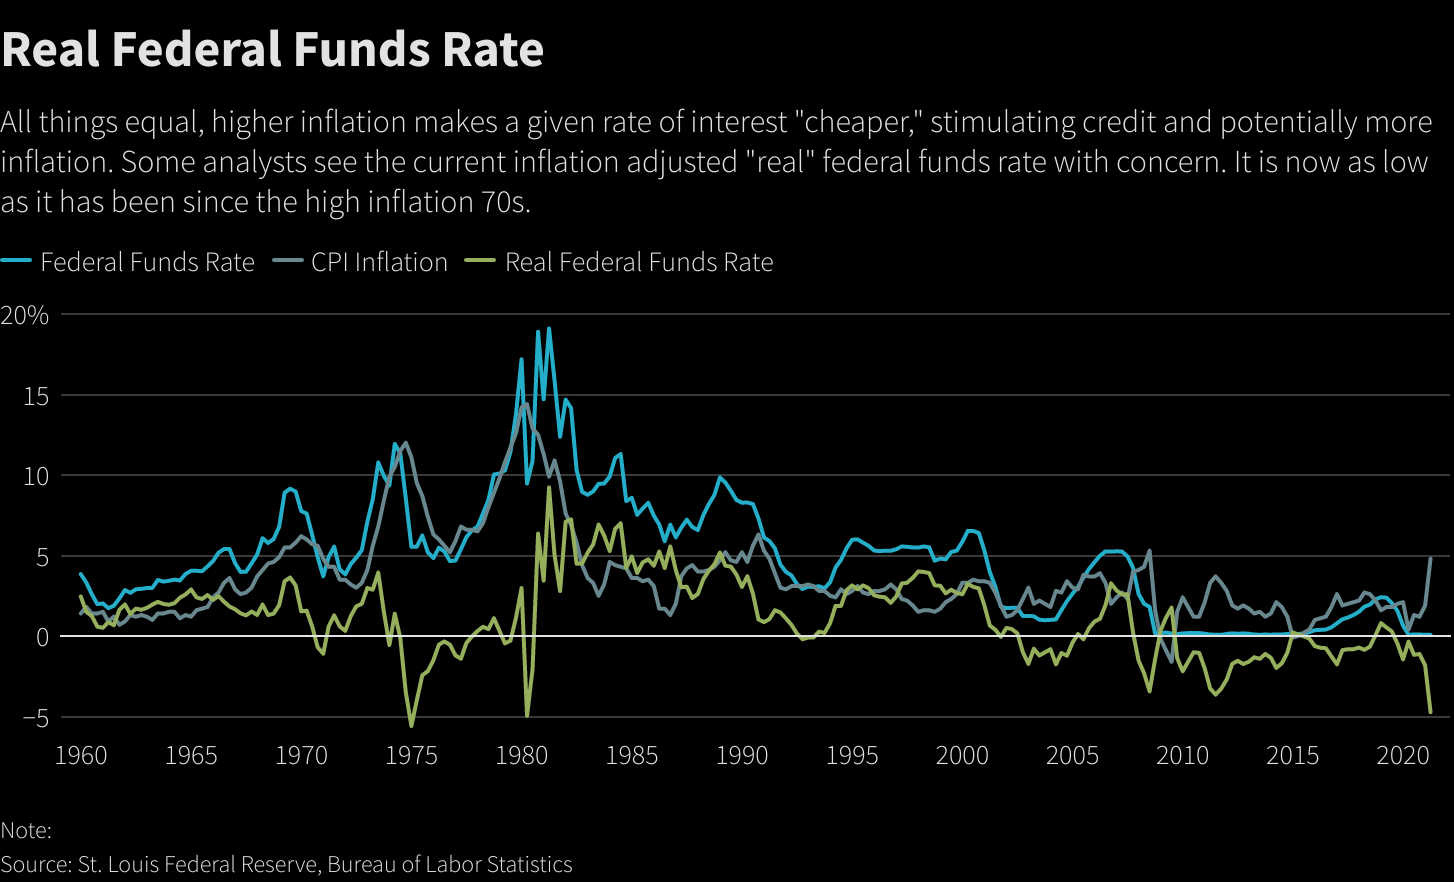 Real Federal Funds Rate